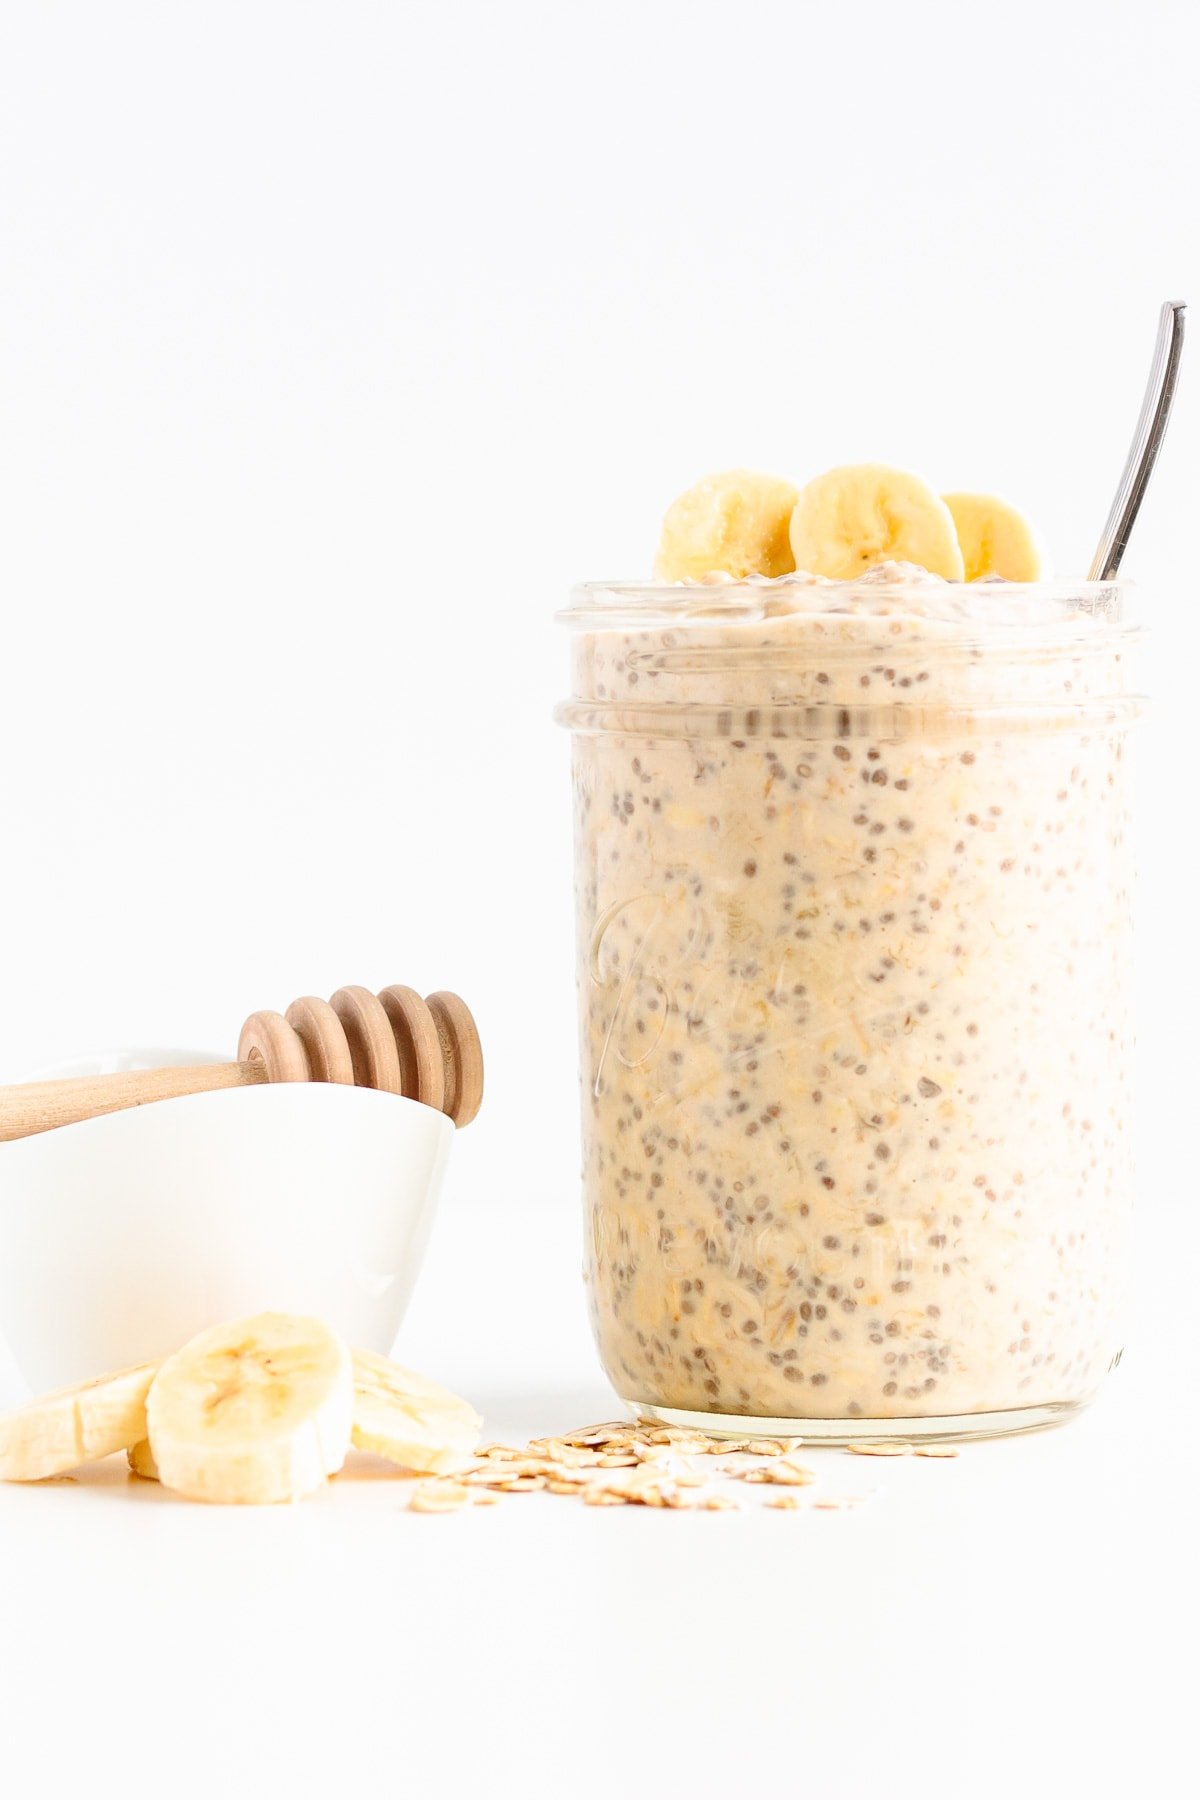 Mason jar of banana overnight oats with honey, banana slices and some rolled oats scattered next to it.